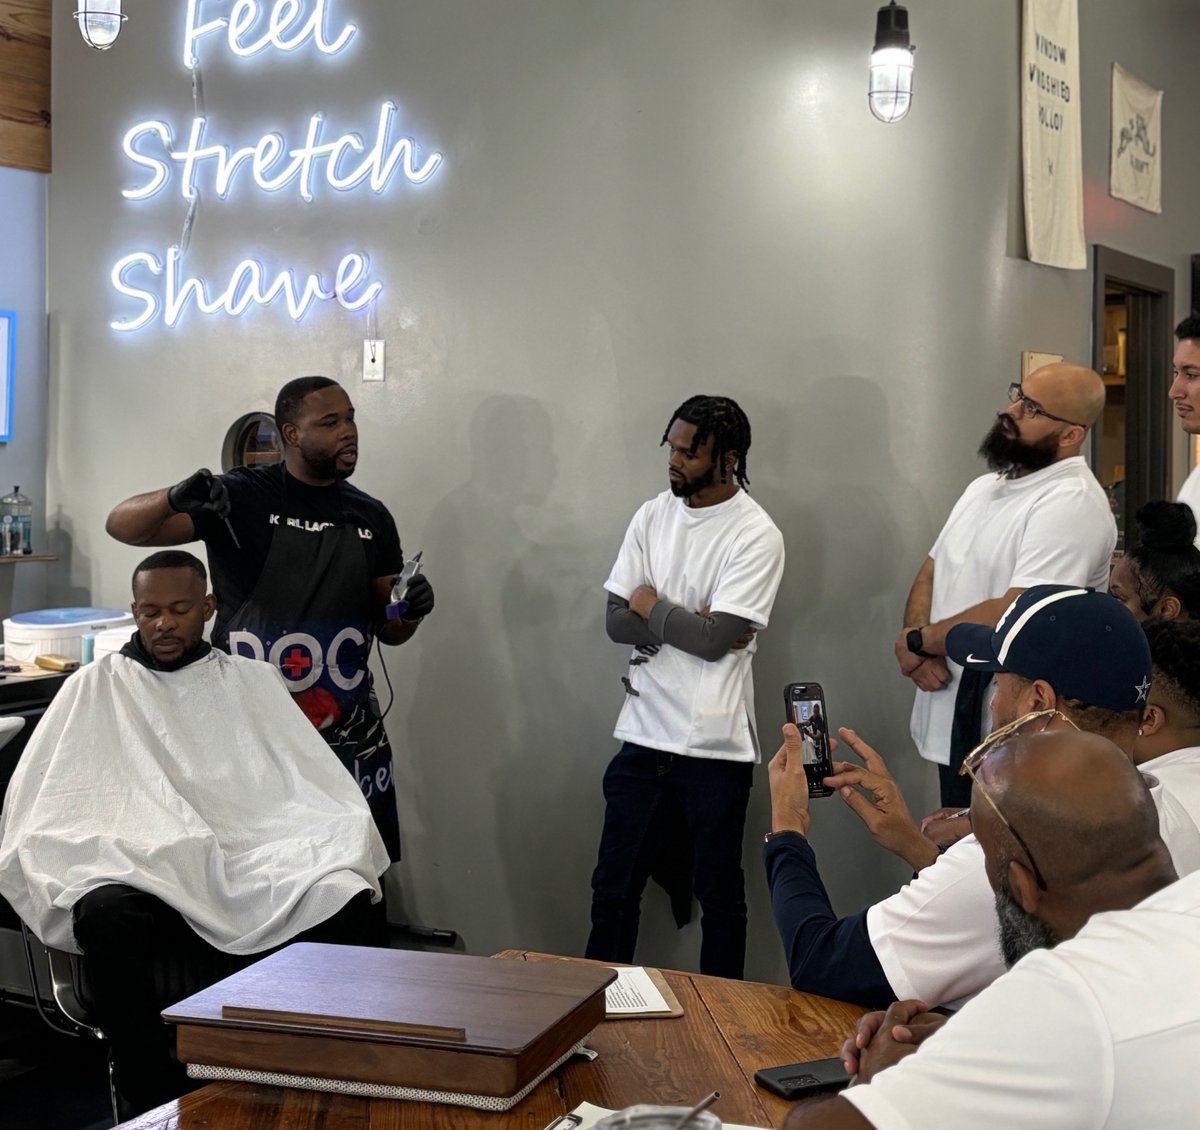 Two spots available for classes this Monday, are you ready to become a barber? #bladecraftbarberacademy

#barberschool #barber #barbershop #barberlife #barberworld #barbershopconnect #barbers #barbergang #barberlove #barbernation #barbering #barberstyle